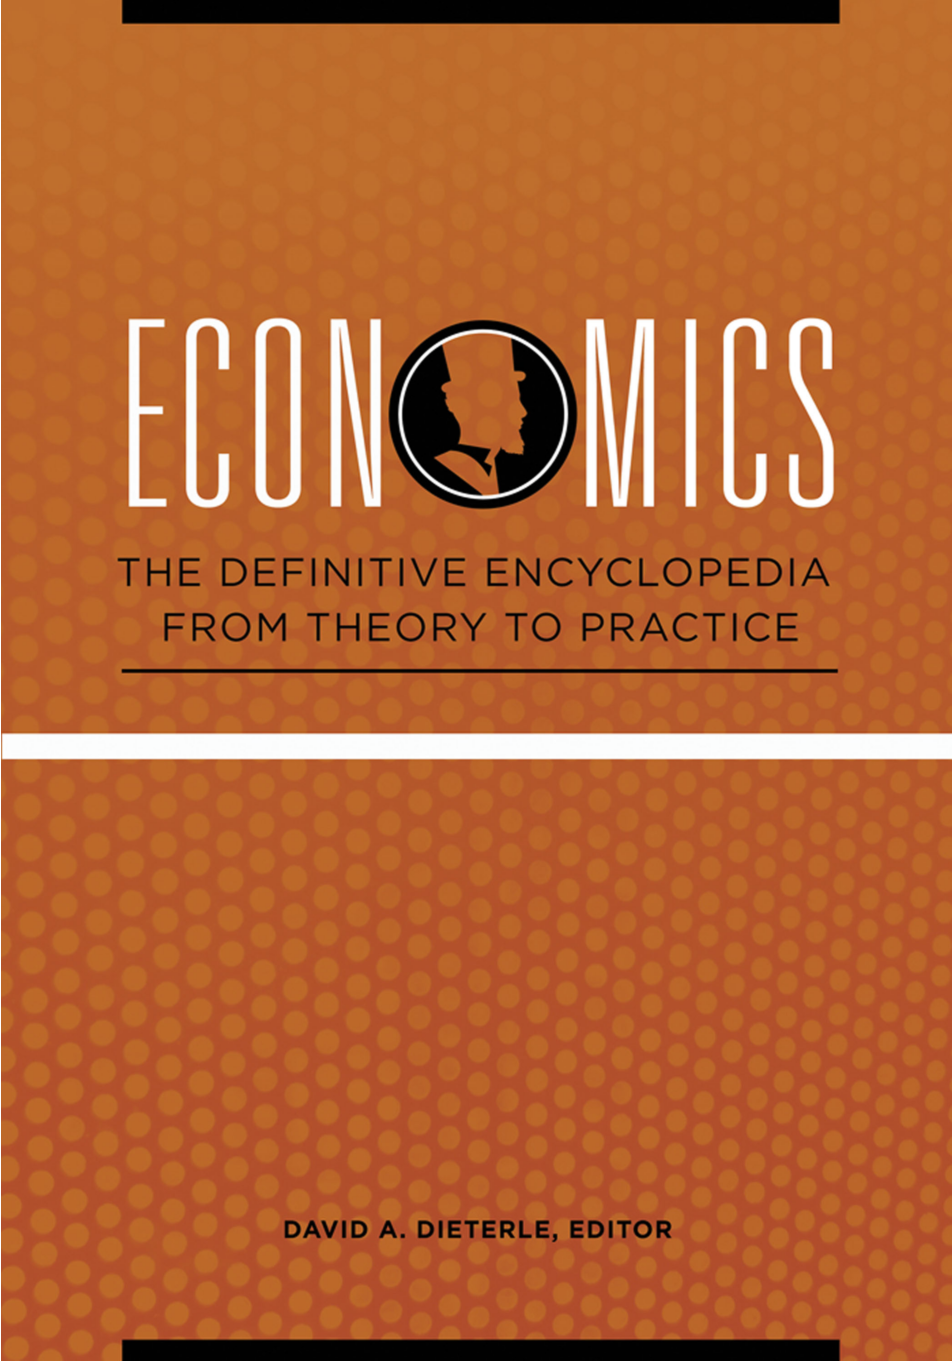 Economics: The Definitive Encyclopedia from Theory to Practice [4 volumes] page Cover1